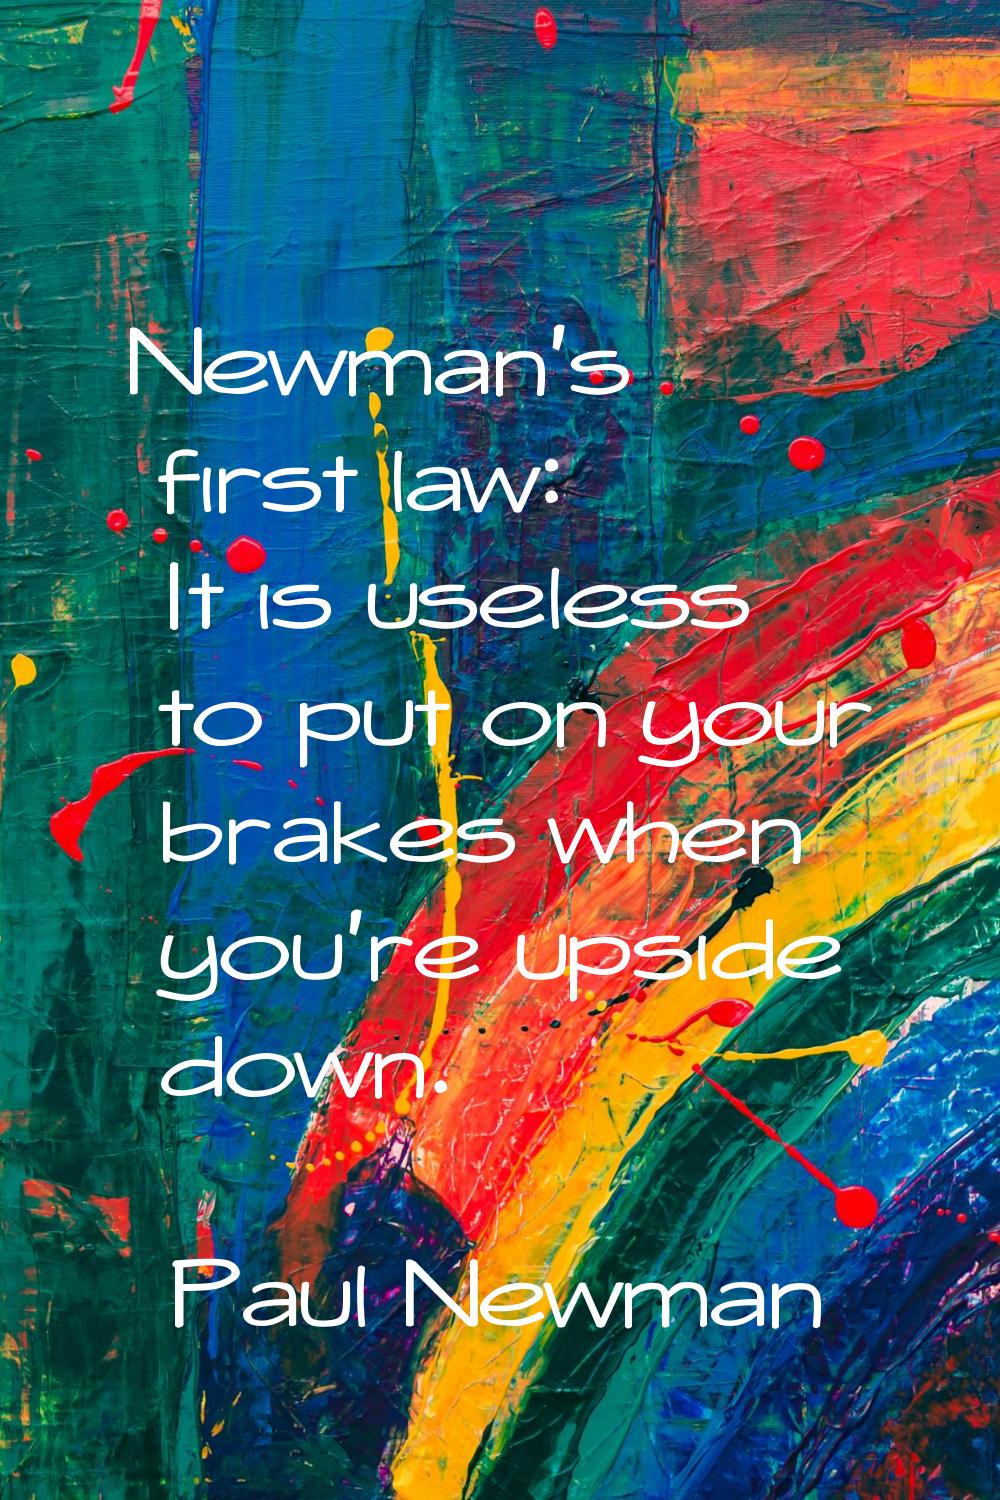 Newman's first law: It is useless to put on your brakes when you're upside down.